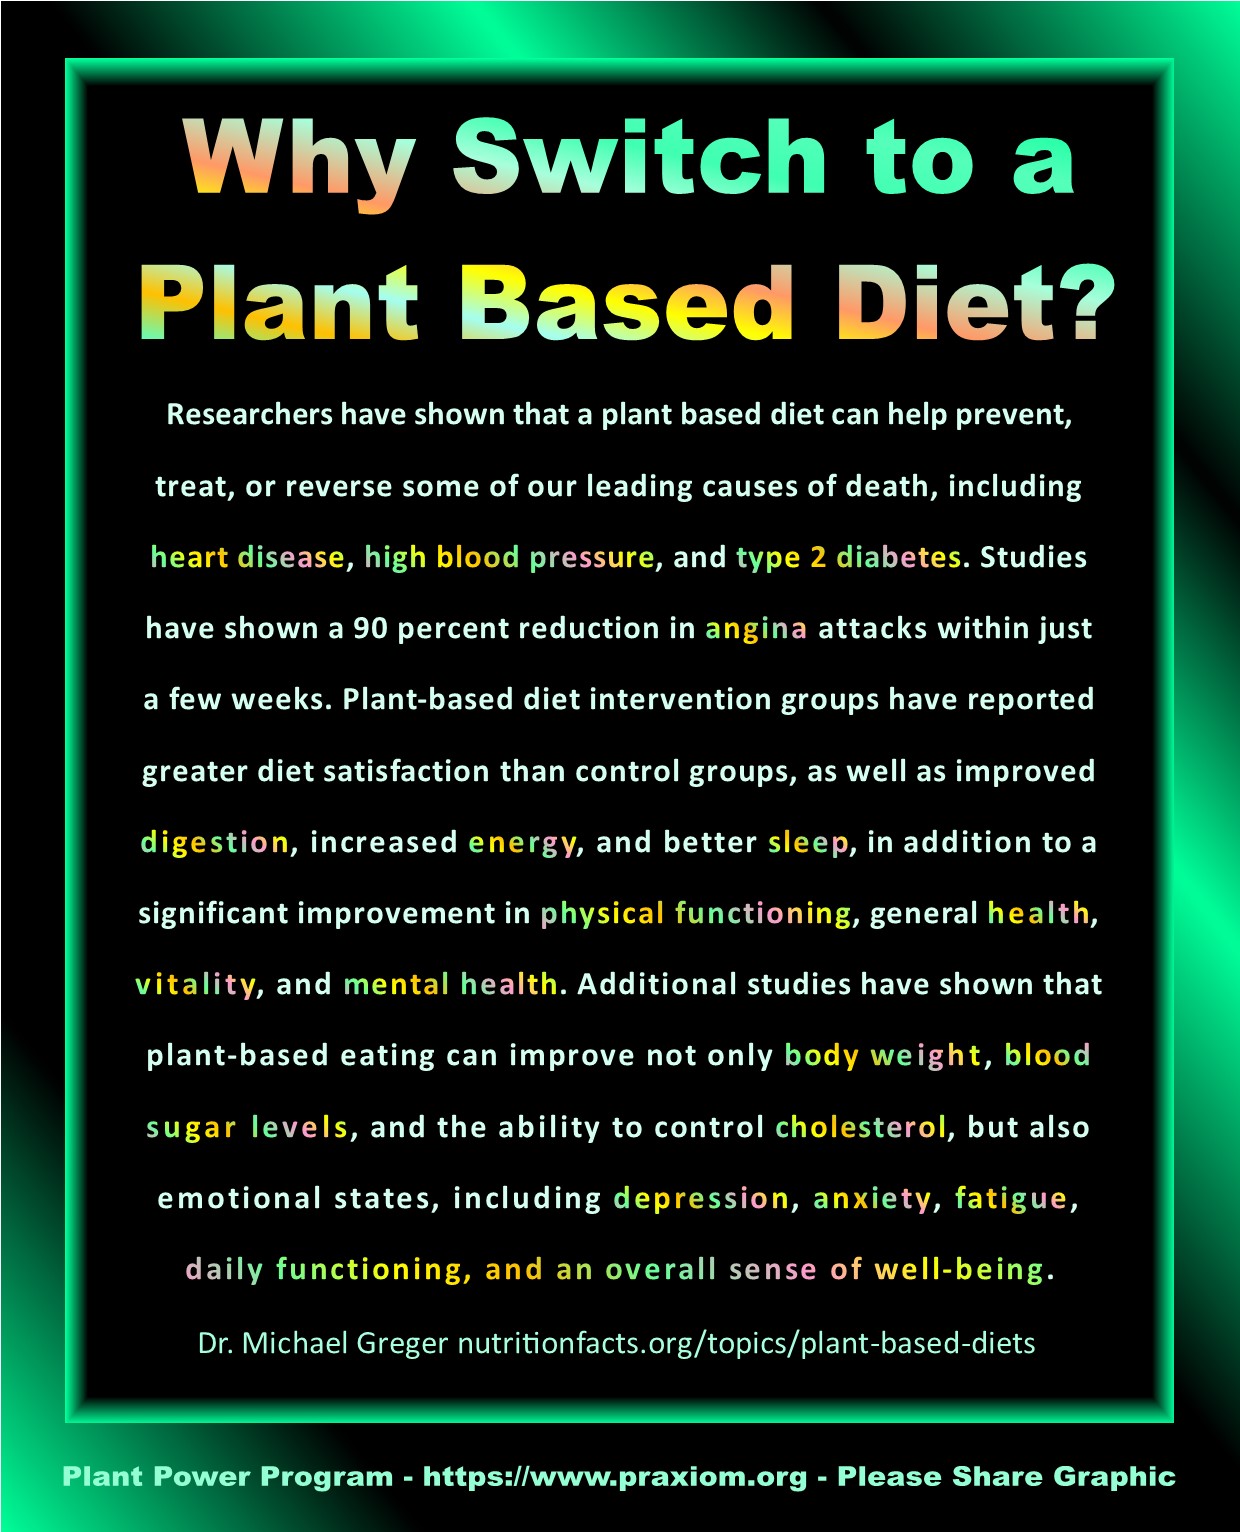 Why Switch to a Plant Based Diet - Dr. Michael Greger